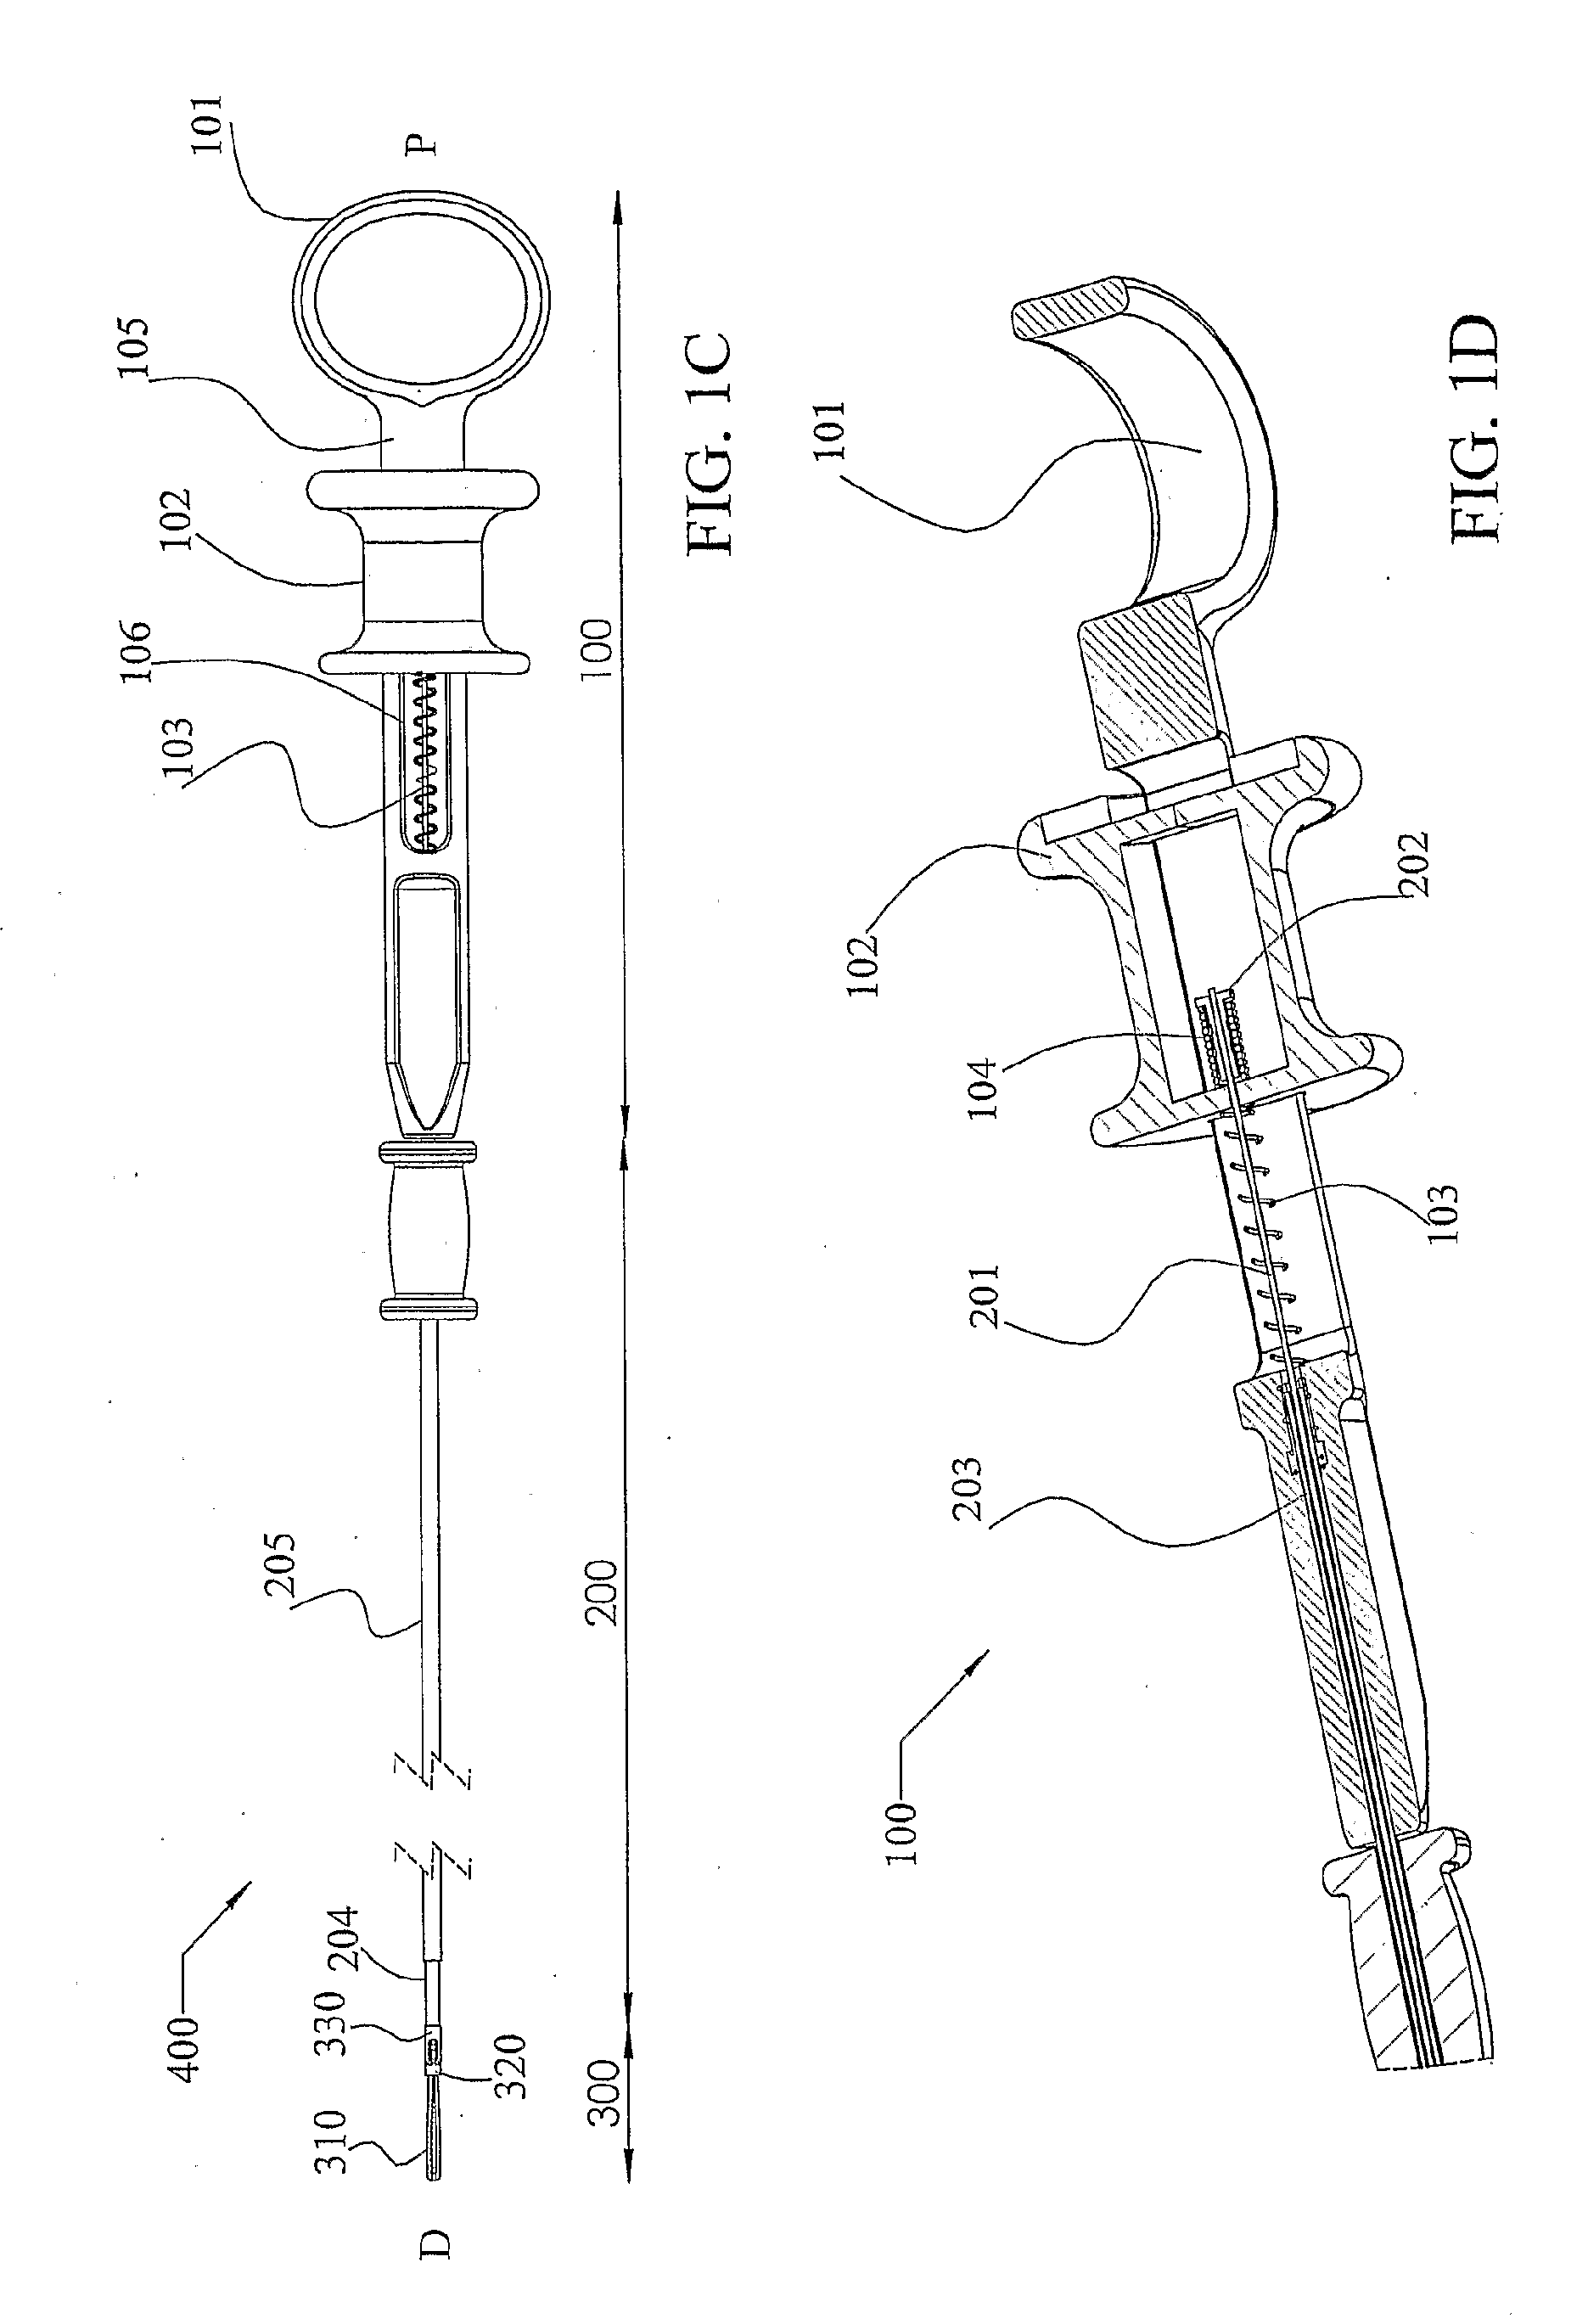 Endoscopic compression clip and system and method for use thereof